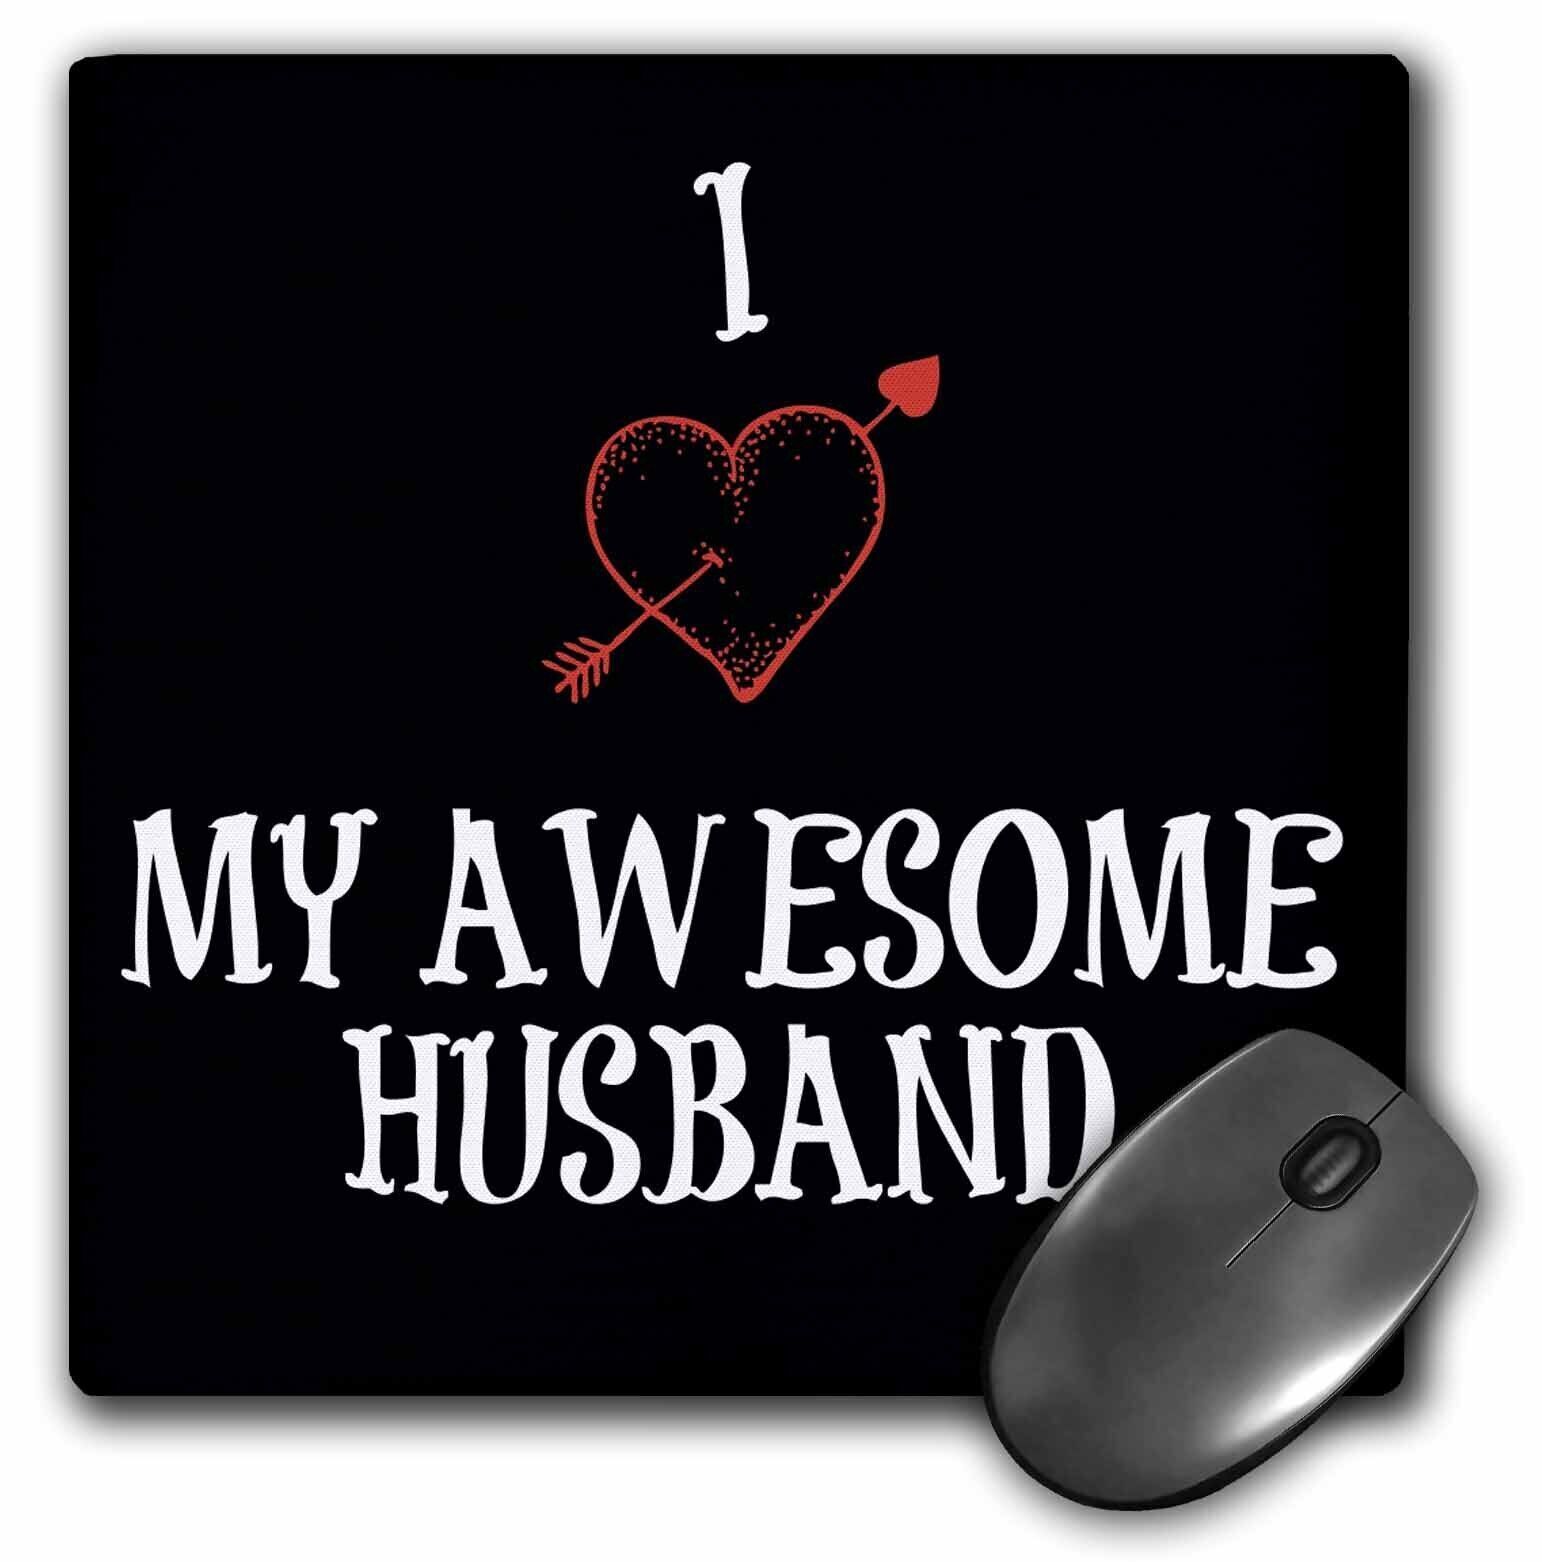 3dRose I Love My Awesome Husband, red heart, black background MousePad